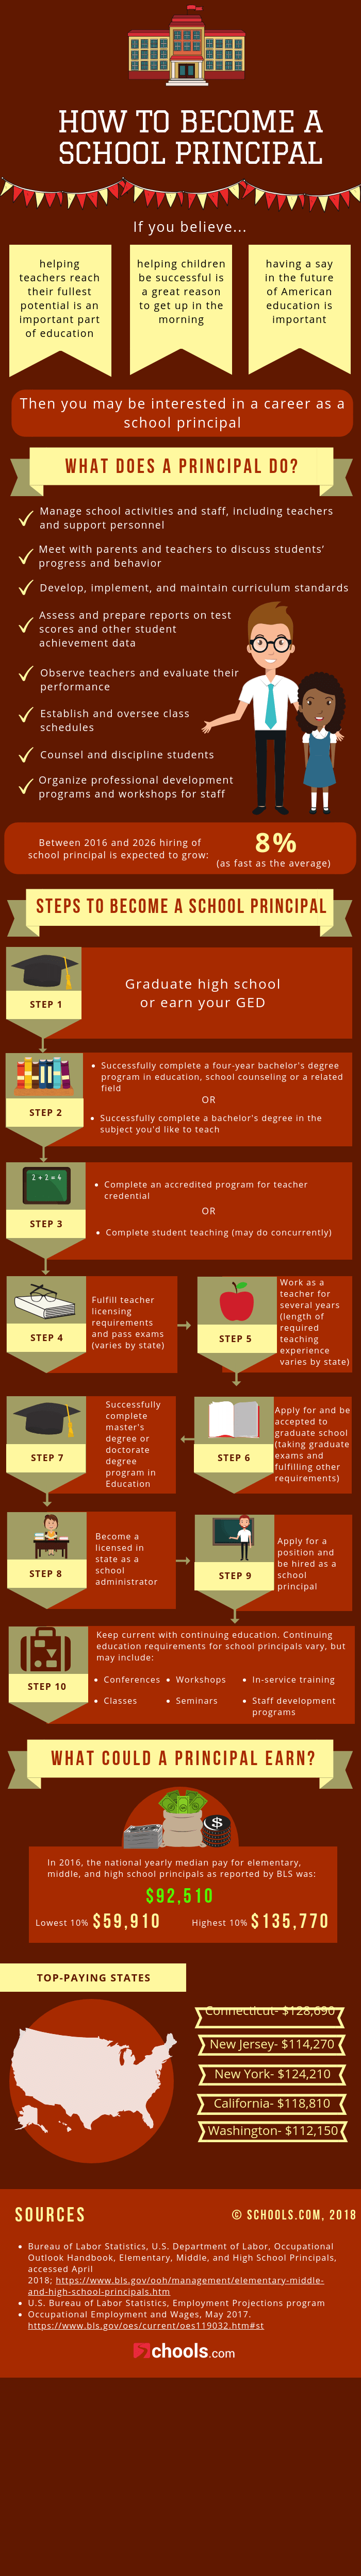 How to Become a School Principal